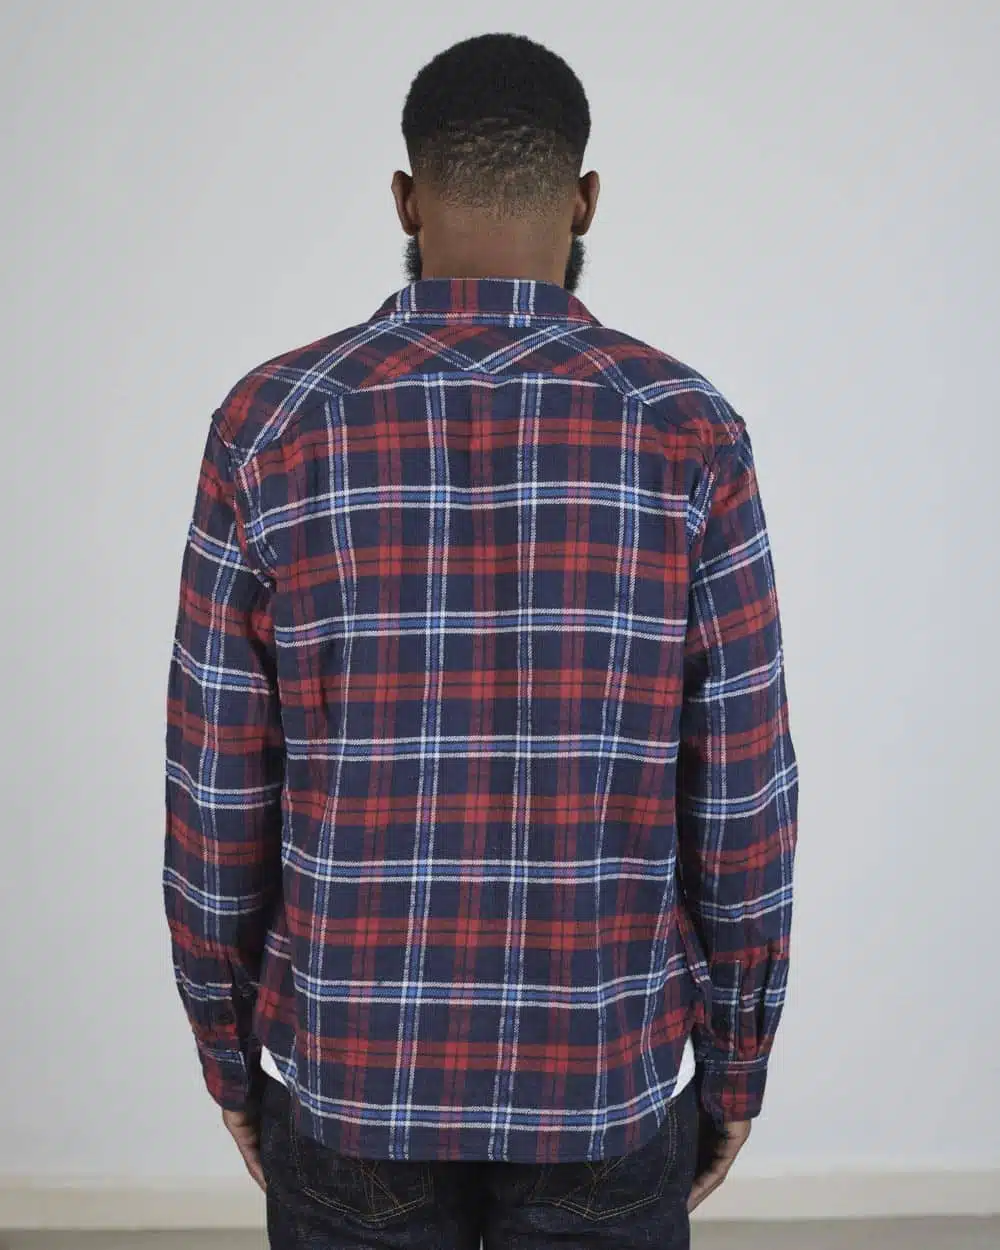 The Strike Gold SG2202 Brushed Check Work Shirt - Navy